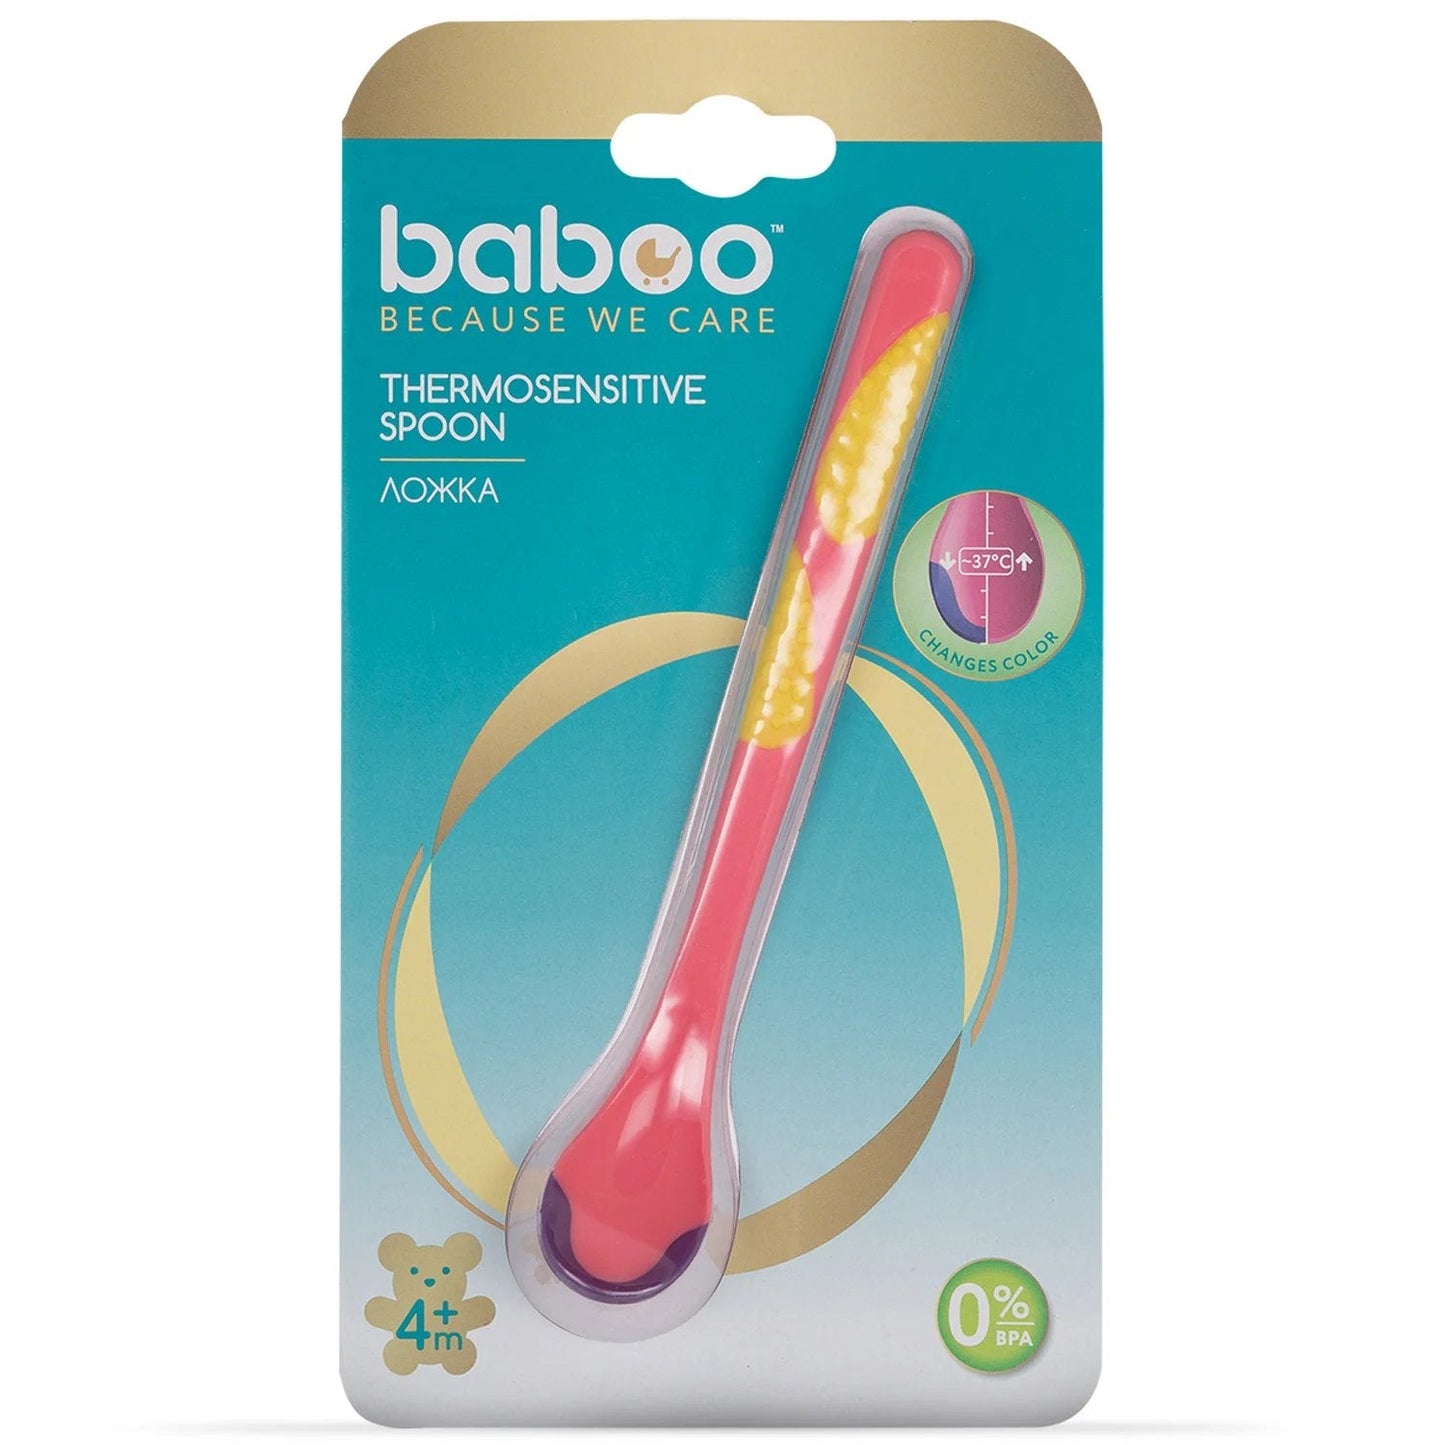 Baboo Plastic Spoon Thermosensitive Long Handle Red 4+